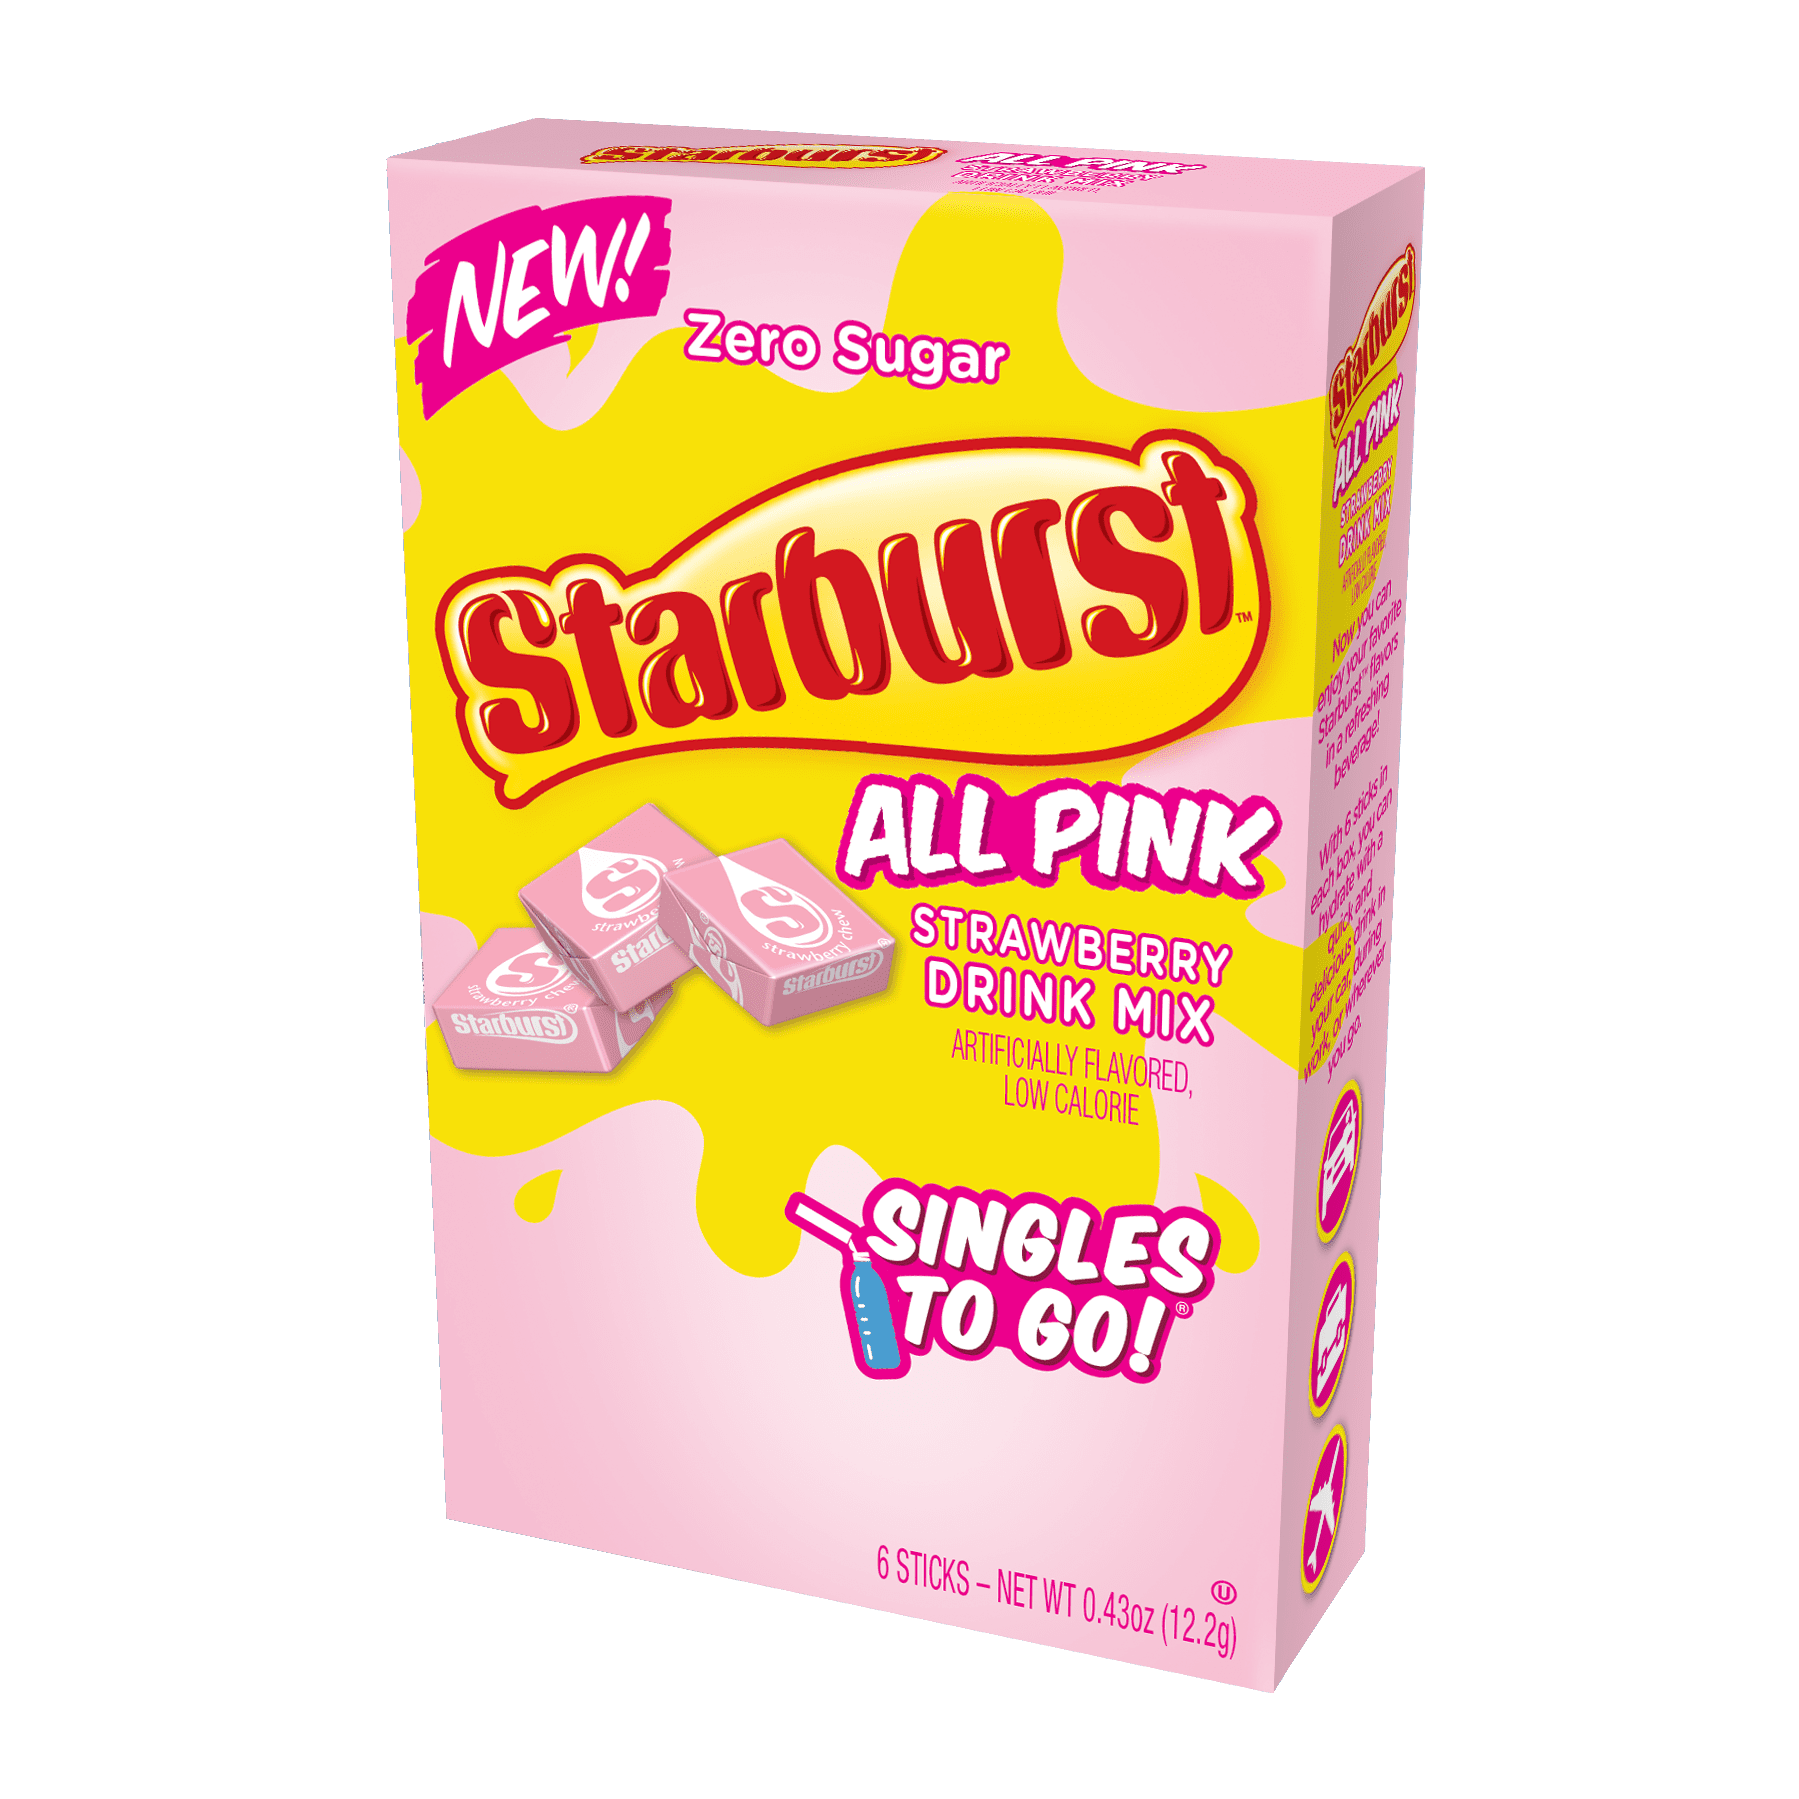 Starburst Sugar Free Strawberry Drink Mix - Two Boxes of 6ct Each Box